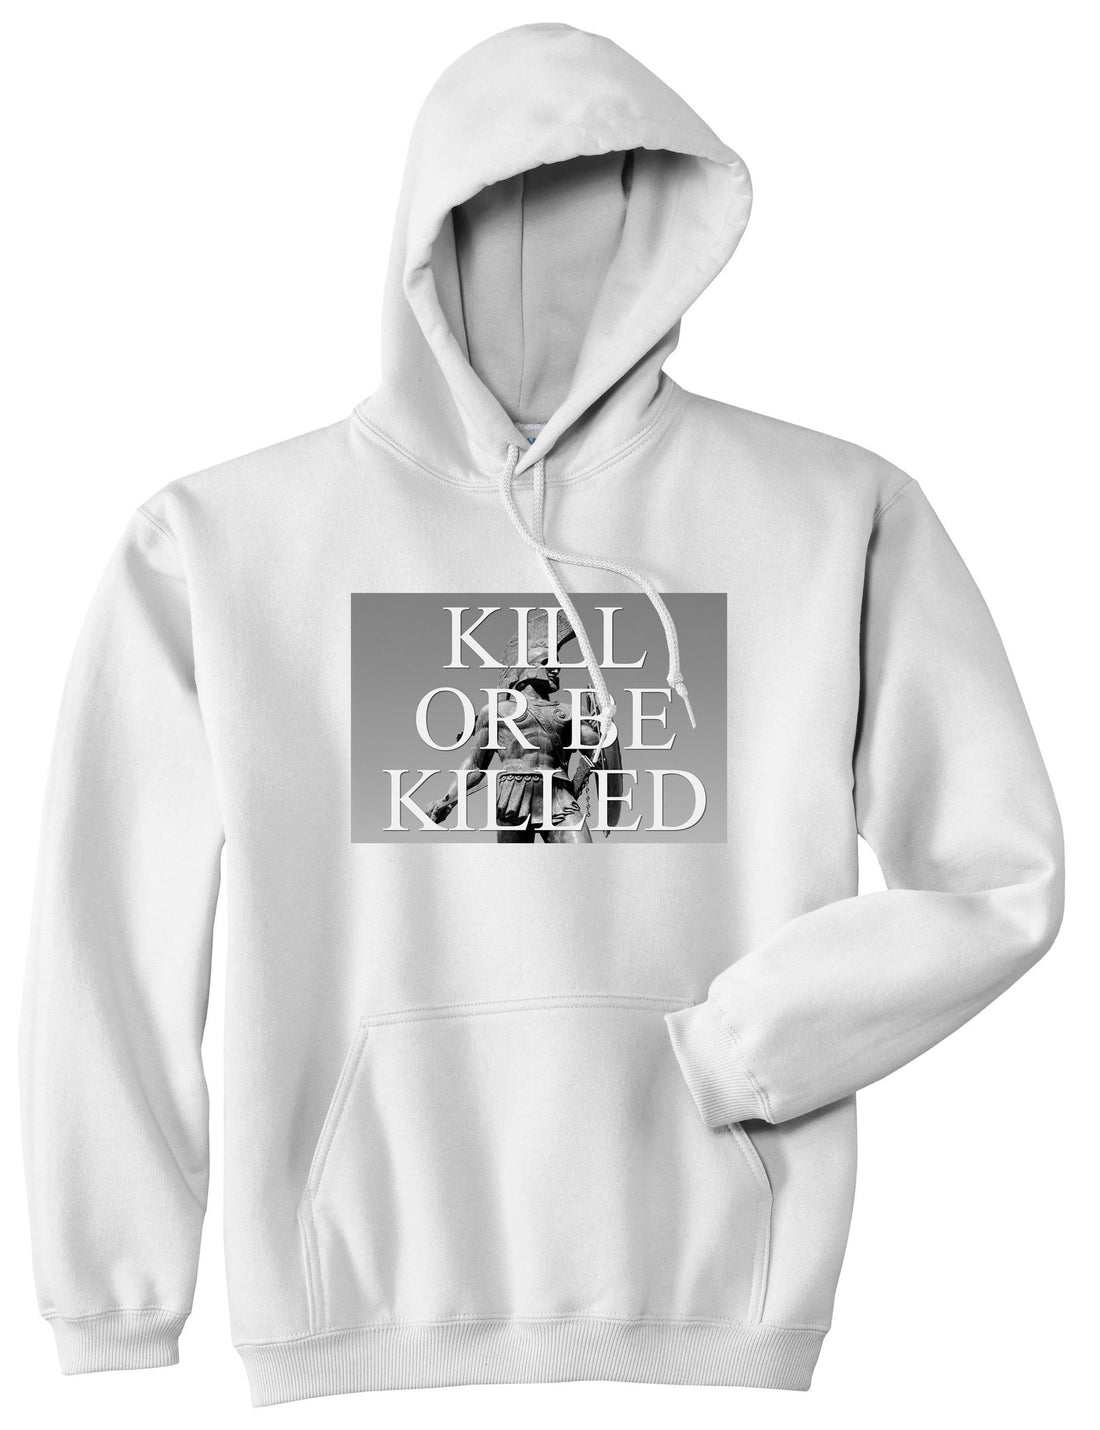 Kill Or Be Killed Pullover Hoodie Hoody in White by Kings Of NY